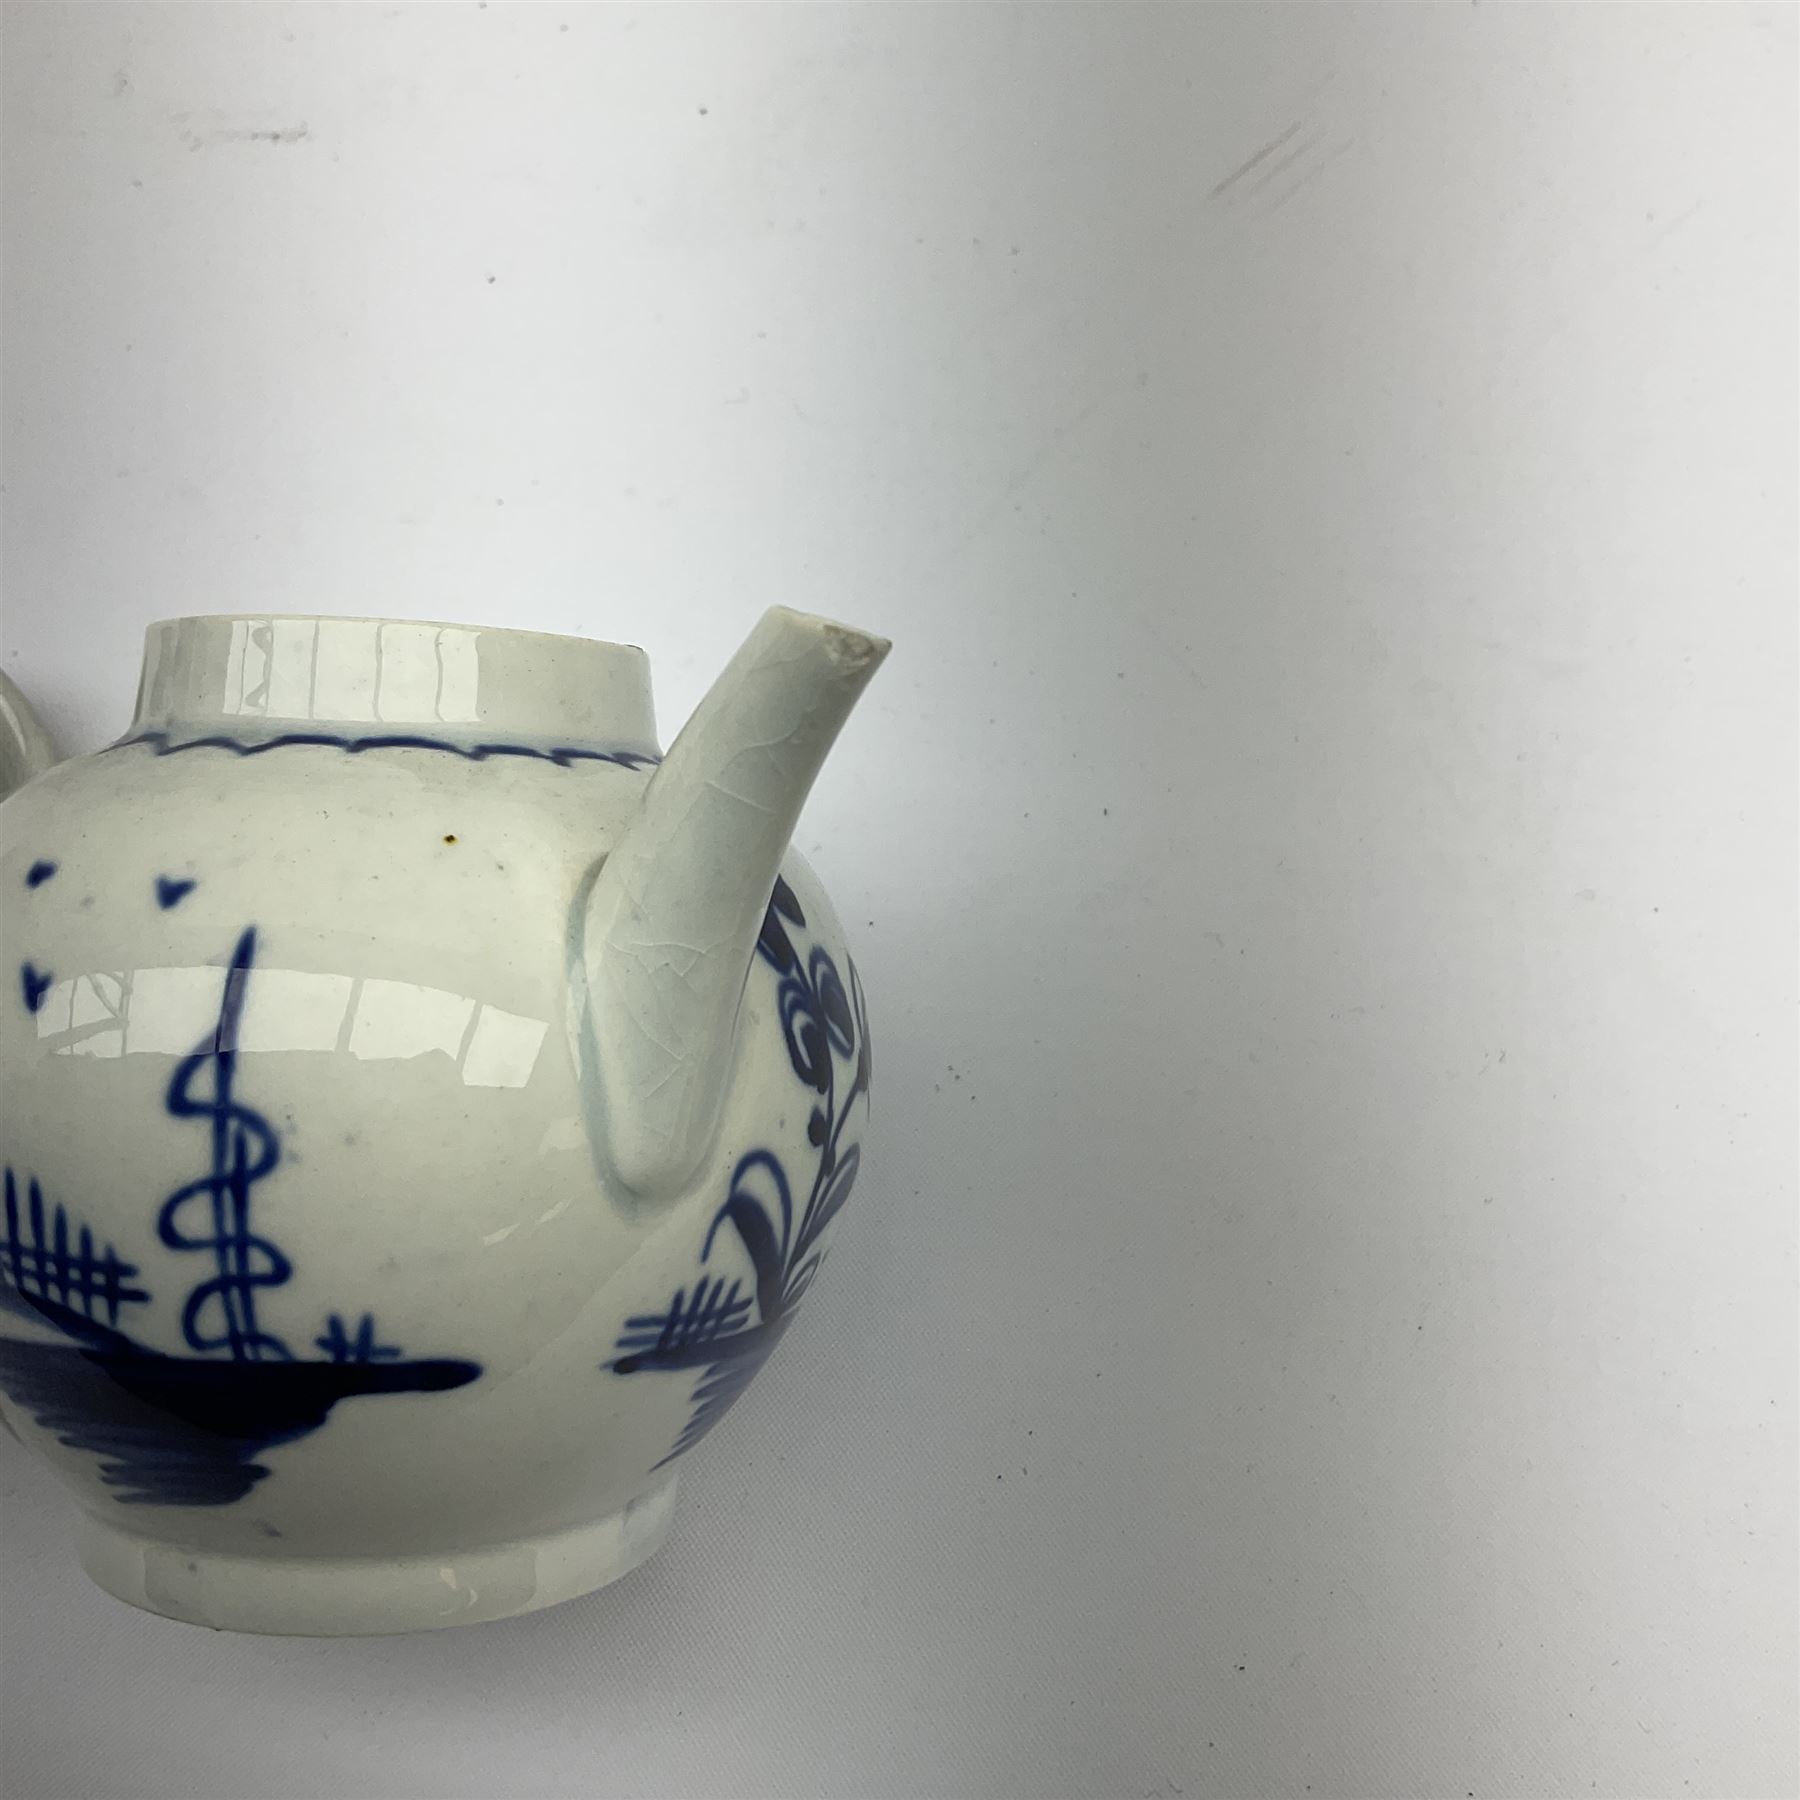 Two 18th century miniature or toy pearlware teapots - Image 8 of 8